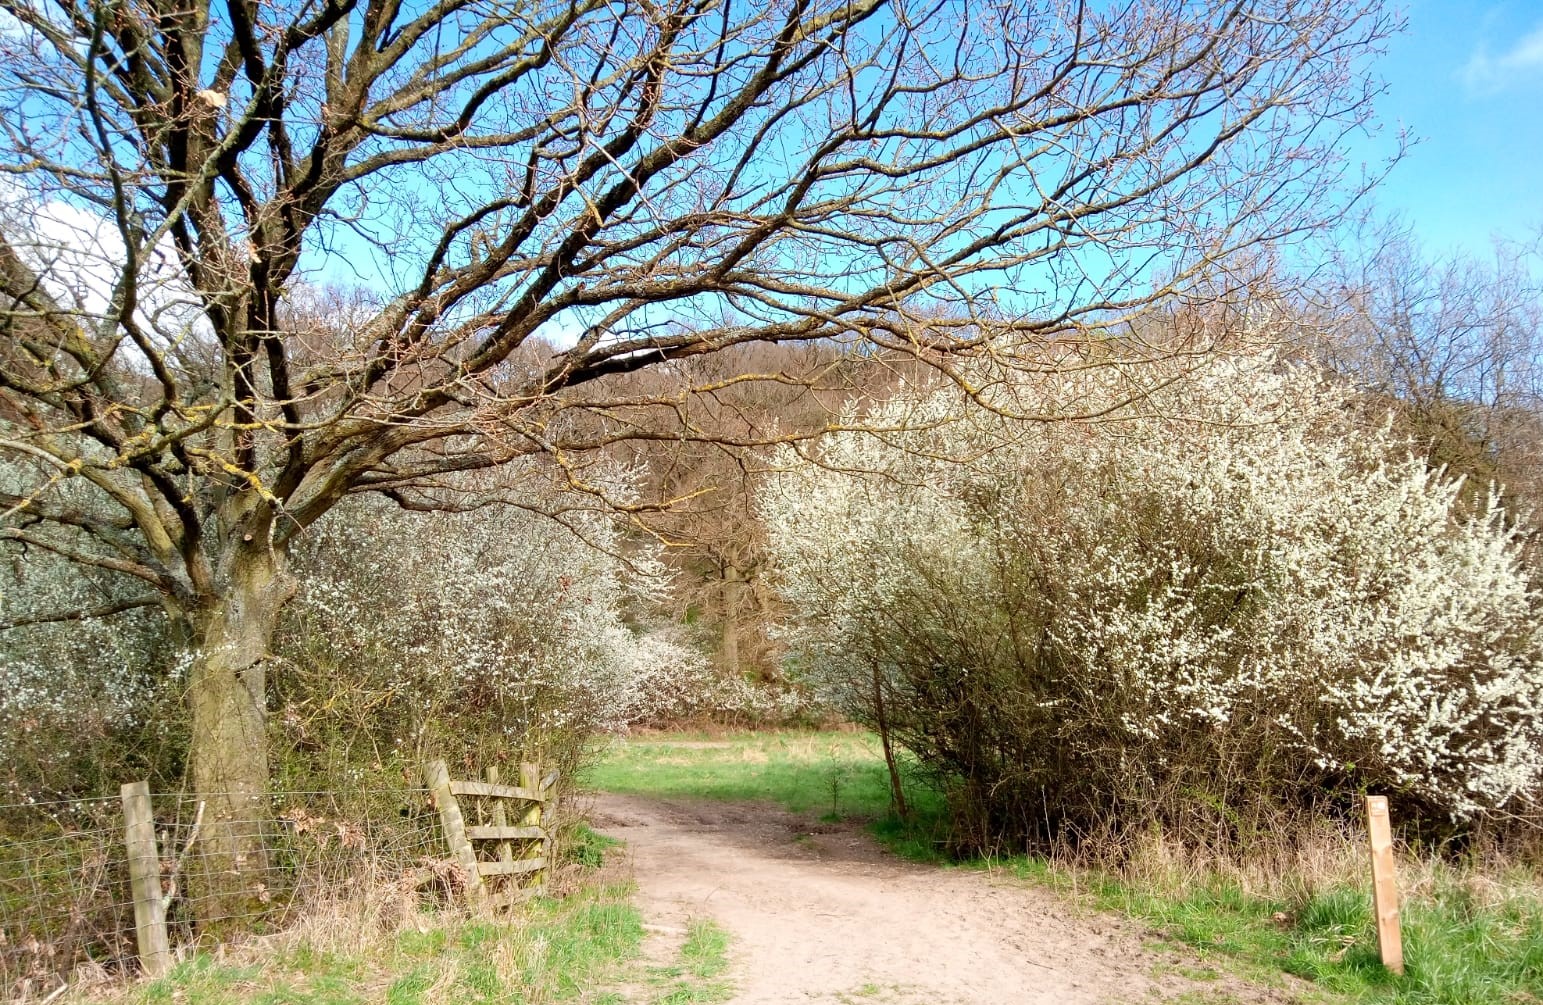 Footpath going through trees and hedgerow with white blossom